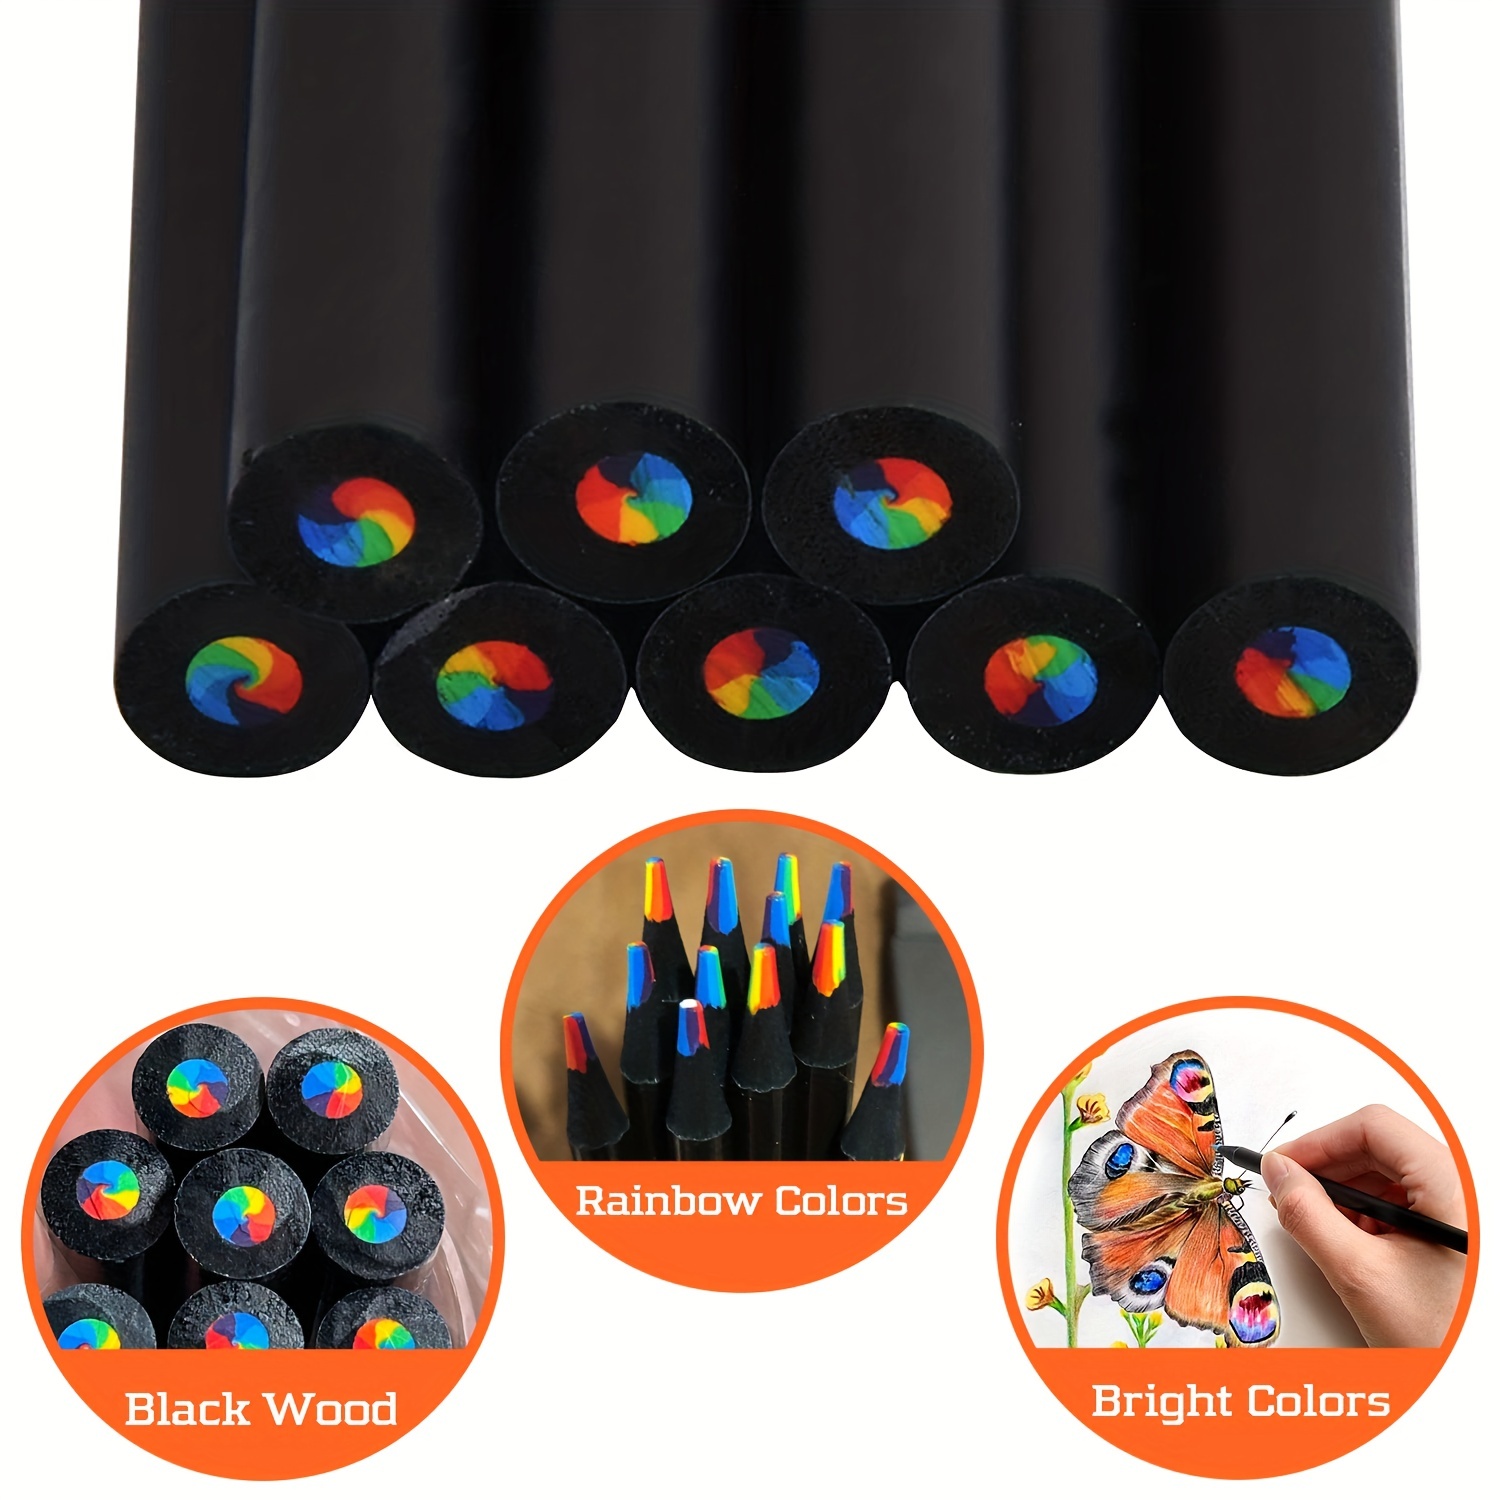  ThEast Black Wooden Rainbow Colored Pencils, 7 Color